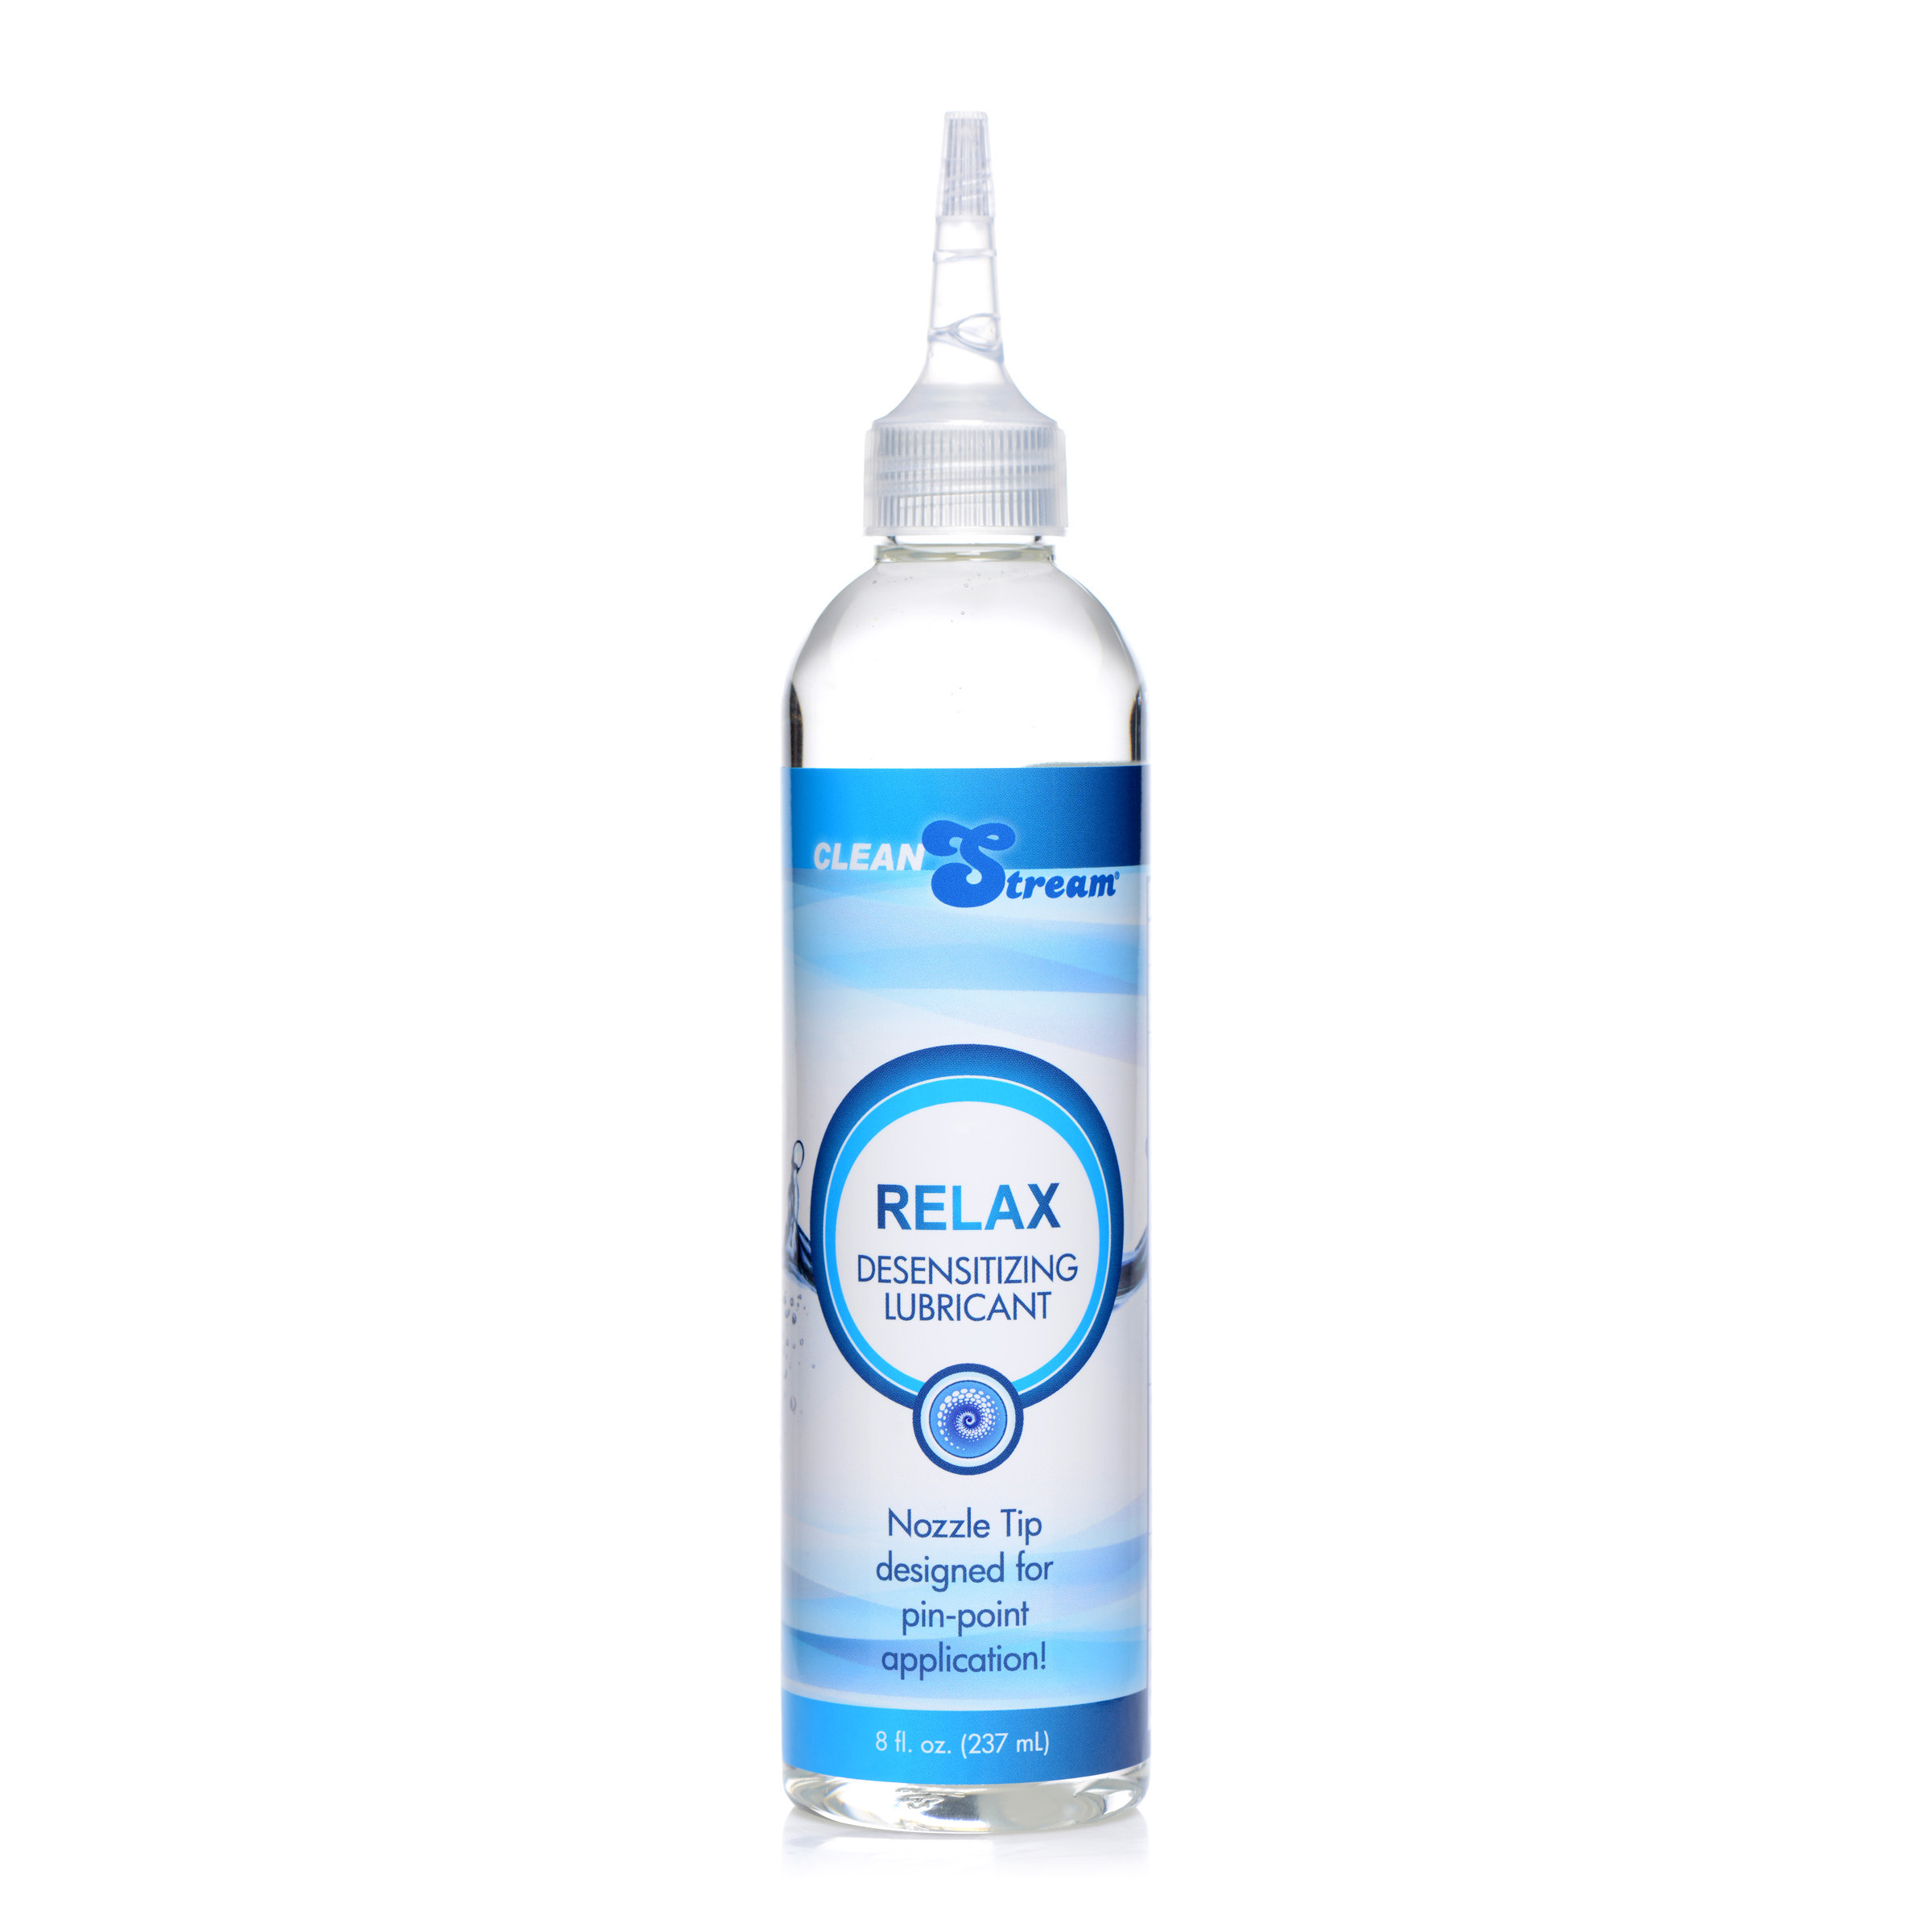 Relax Desensitizing Lubricant With Nozzle Tip – 8 oz.